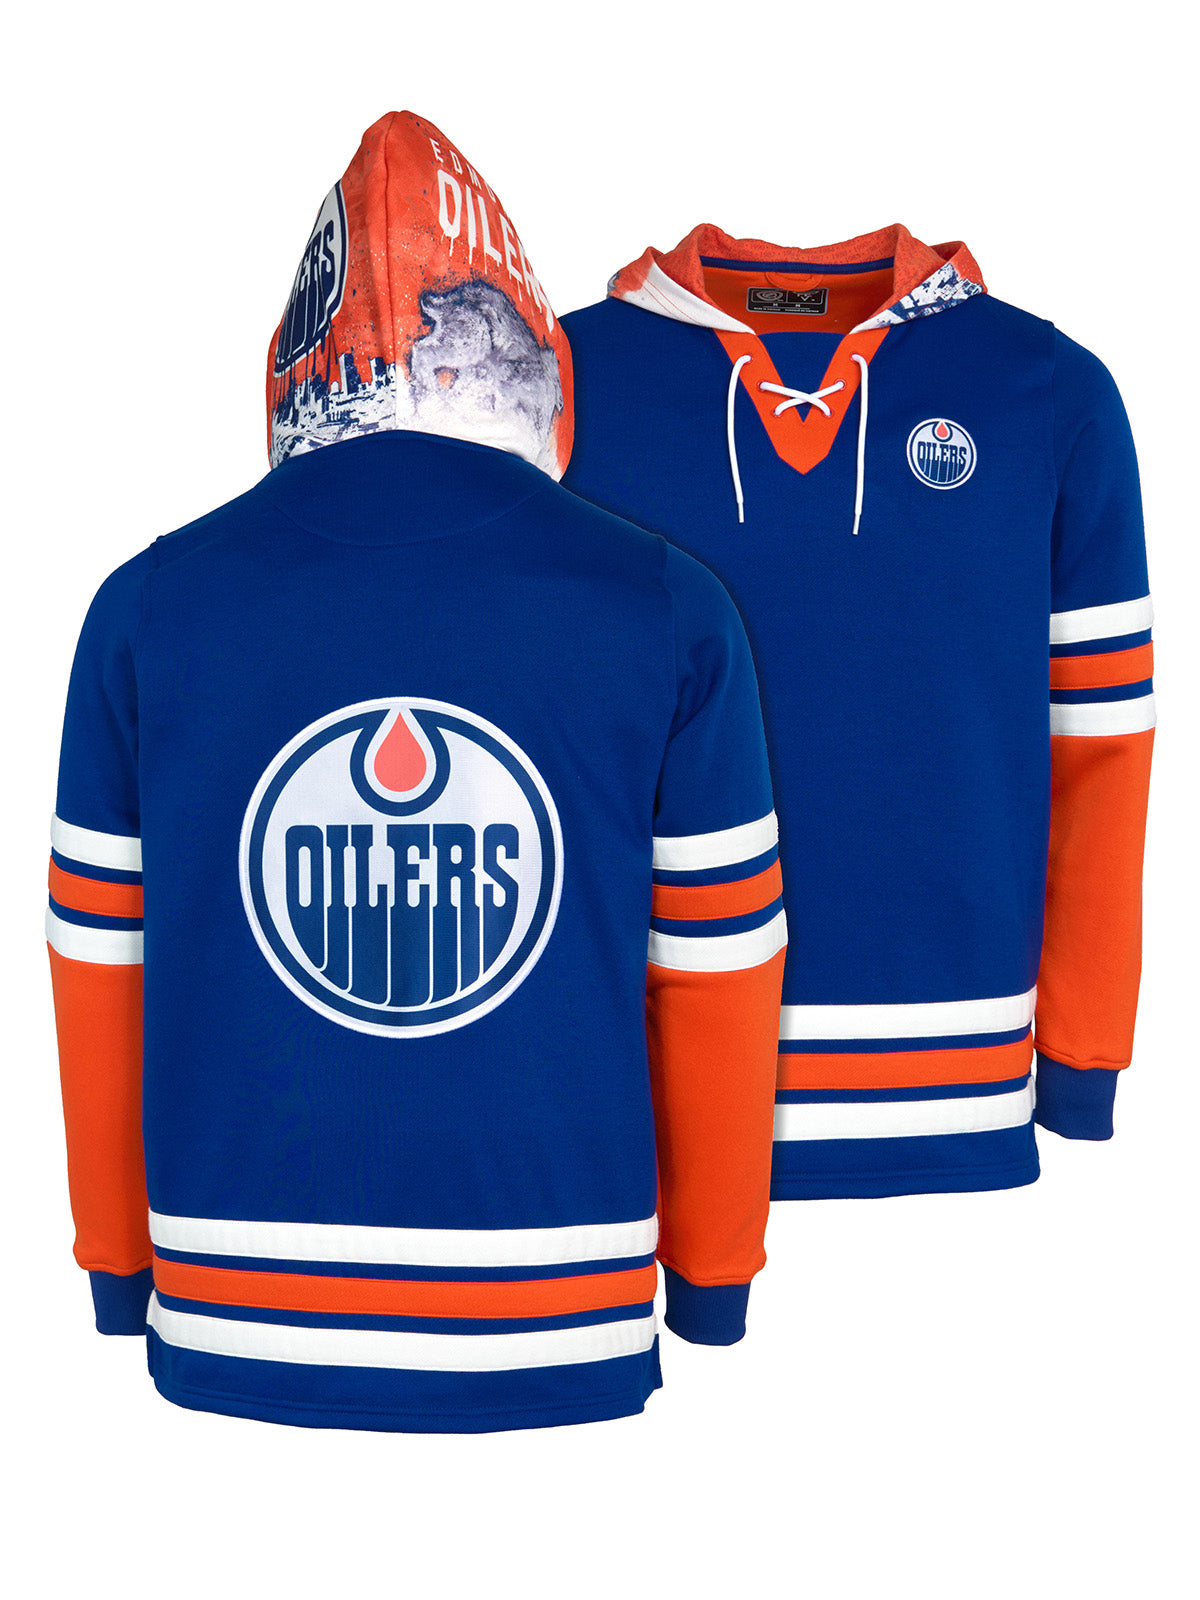 Edmonton Oilers Lace-Up Hoodie - Hand drawn custom hood designs with all the team colors and craftmanship to replicate the gameday jersey of this NHL hoodie